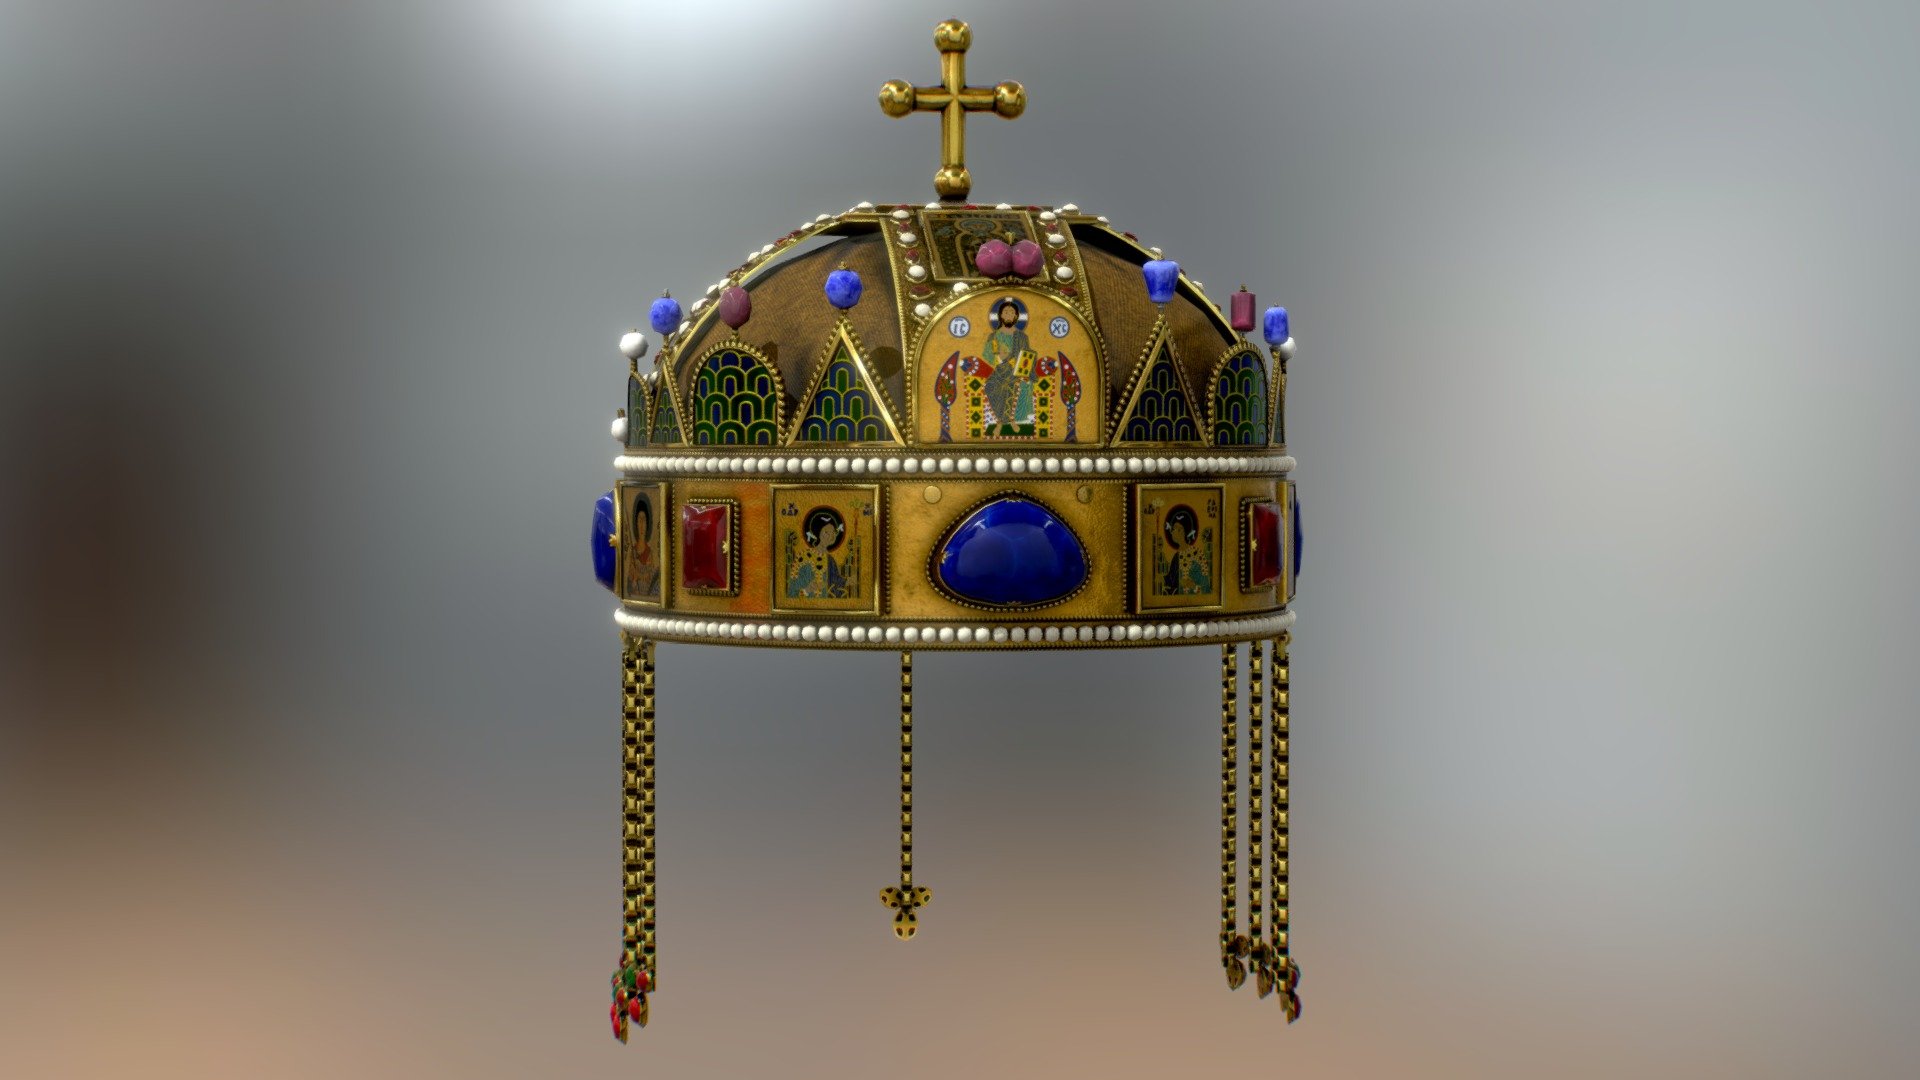 also known as the Crown of Saint Stephen, named in honour of Saint Stephen I of Hungary, was the coronation crown used by the Kingdom of Hungary for most of its existence; kings were crowned with it since the twelfth century. The Crown symbolized the King's authority over the Lands of the Hungarian Crown (the Carpathian Basin), and it was a key mark of legitimacy. Through the history of Hungary, more than fifty kings were crowned with it, with the last being Charles IV in 1916. The only kings not so crowned were Wladyslaw I, John Sigismund Zápolya, and Joseph II.

Source: https://en.wikipedia.org/wiki/Holy_Crown_of_Hungary - Holy Crown of Hungary - Buy Royalty Free 3D model by Davicolt 3d model